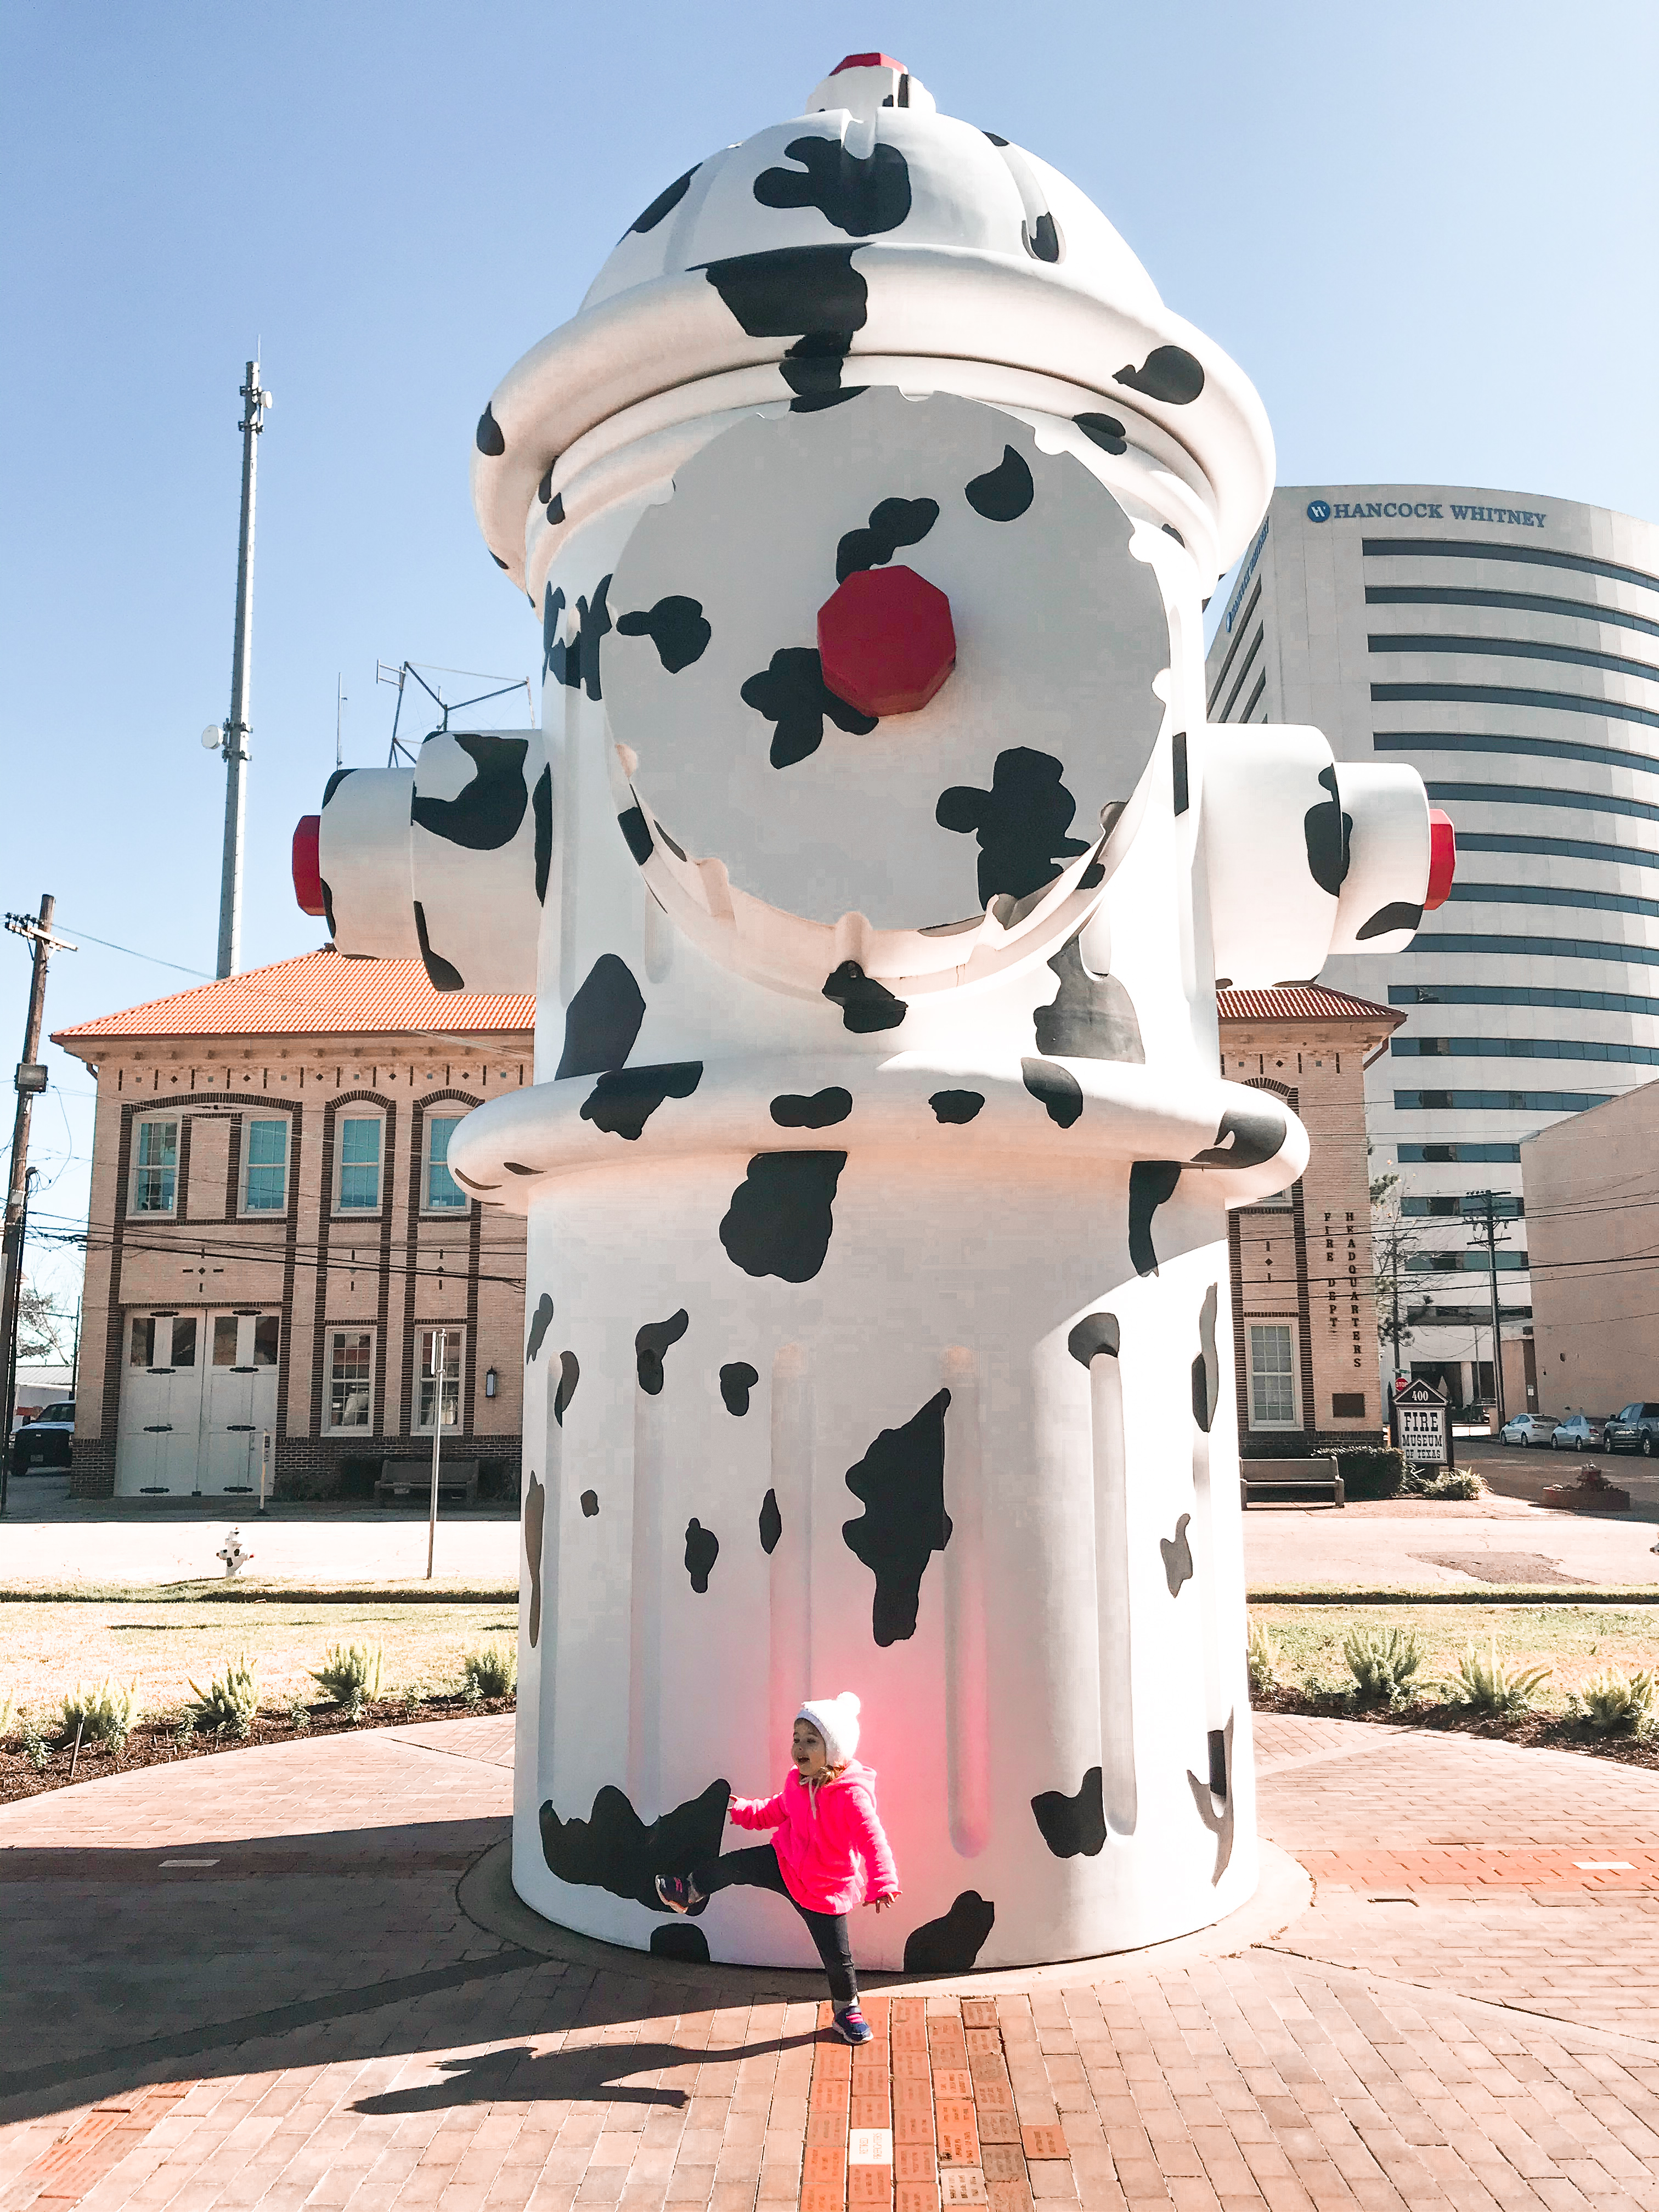 The World’s Largest Working Fire Hydrant in Beaumont, TX